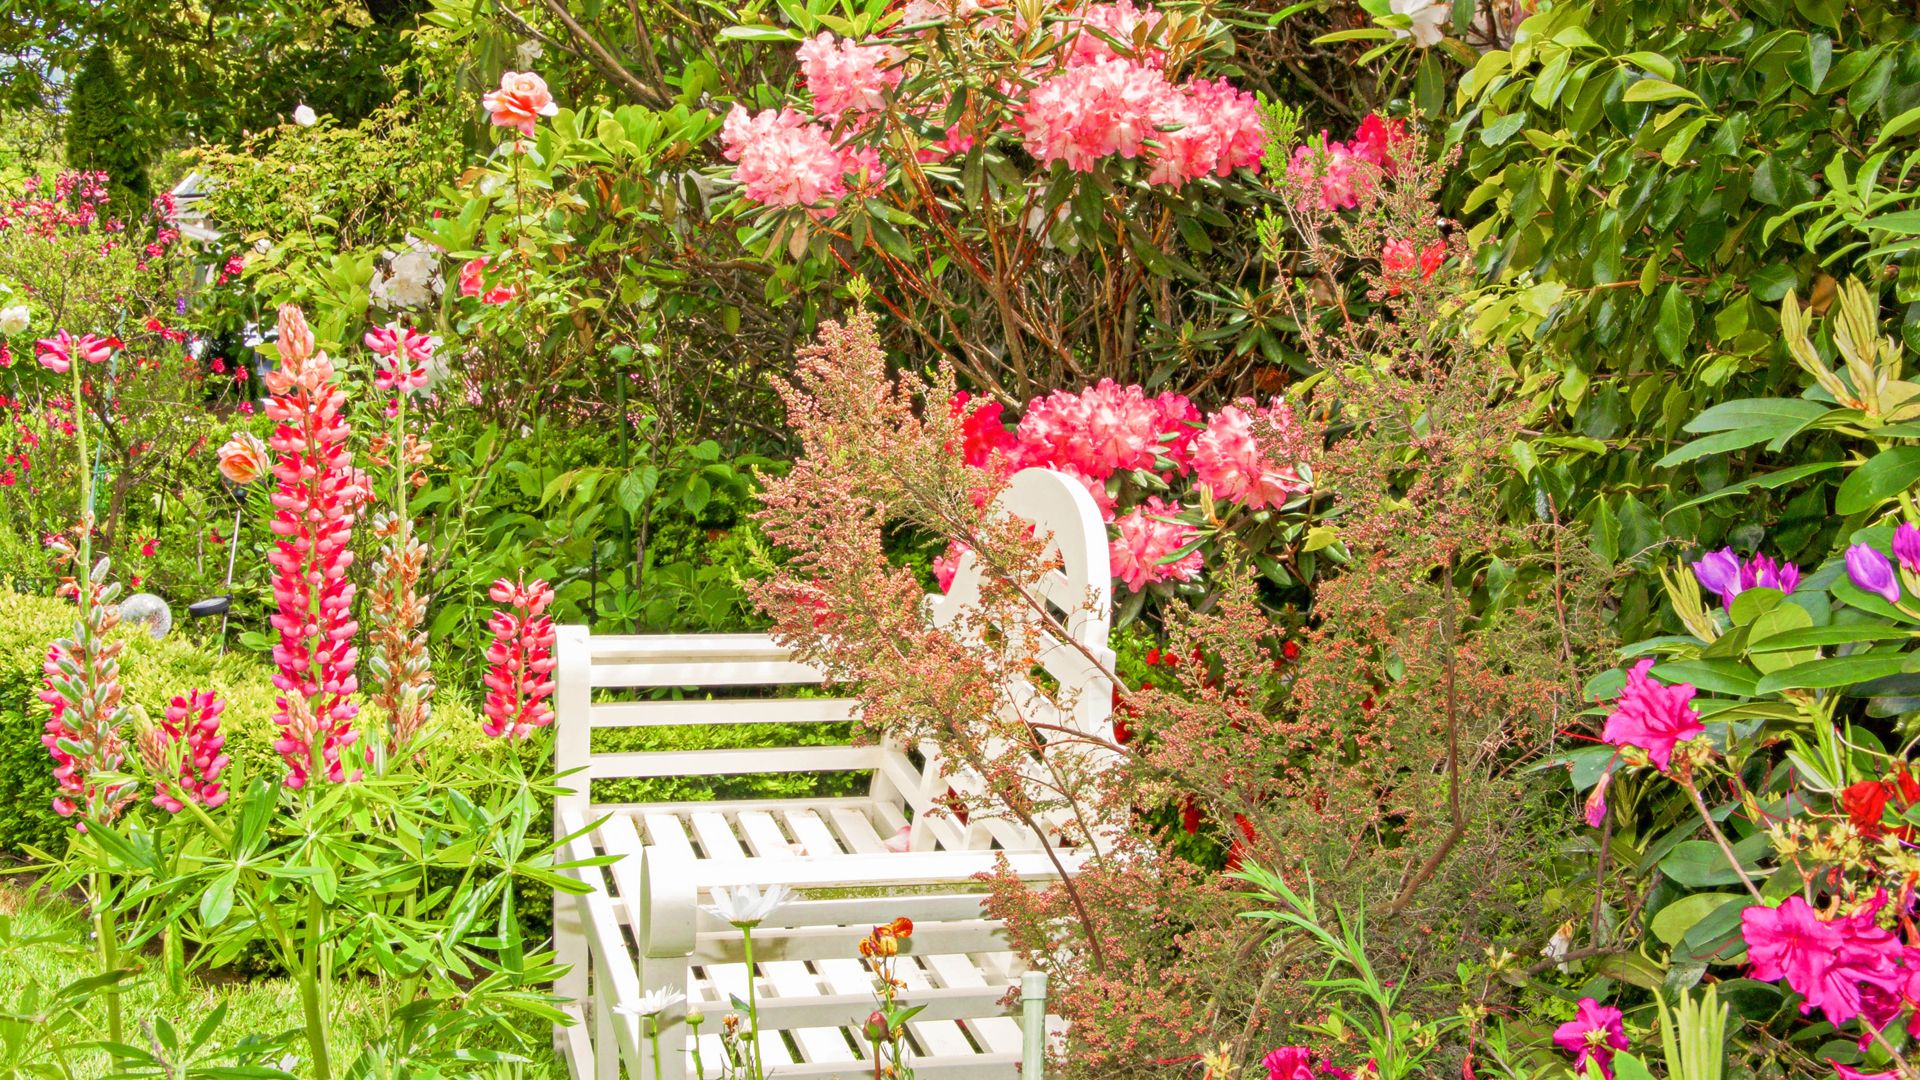 garden seat, a place to enjoy the flowers or read a book